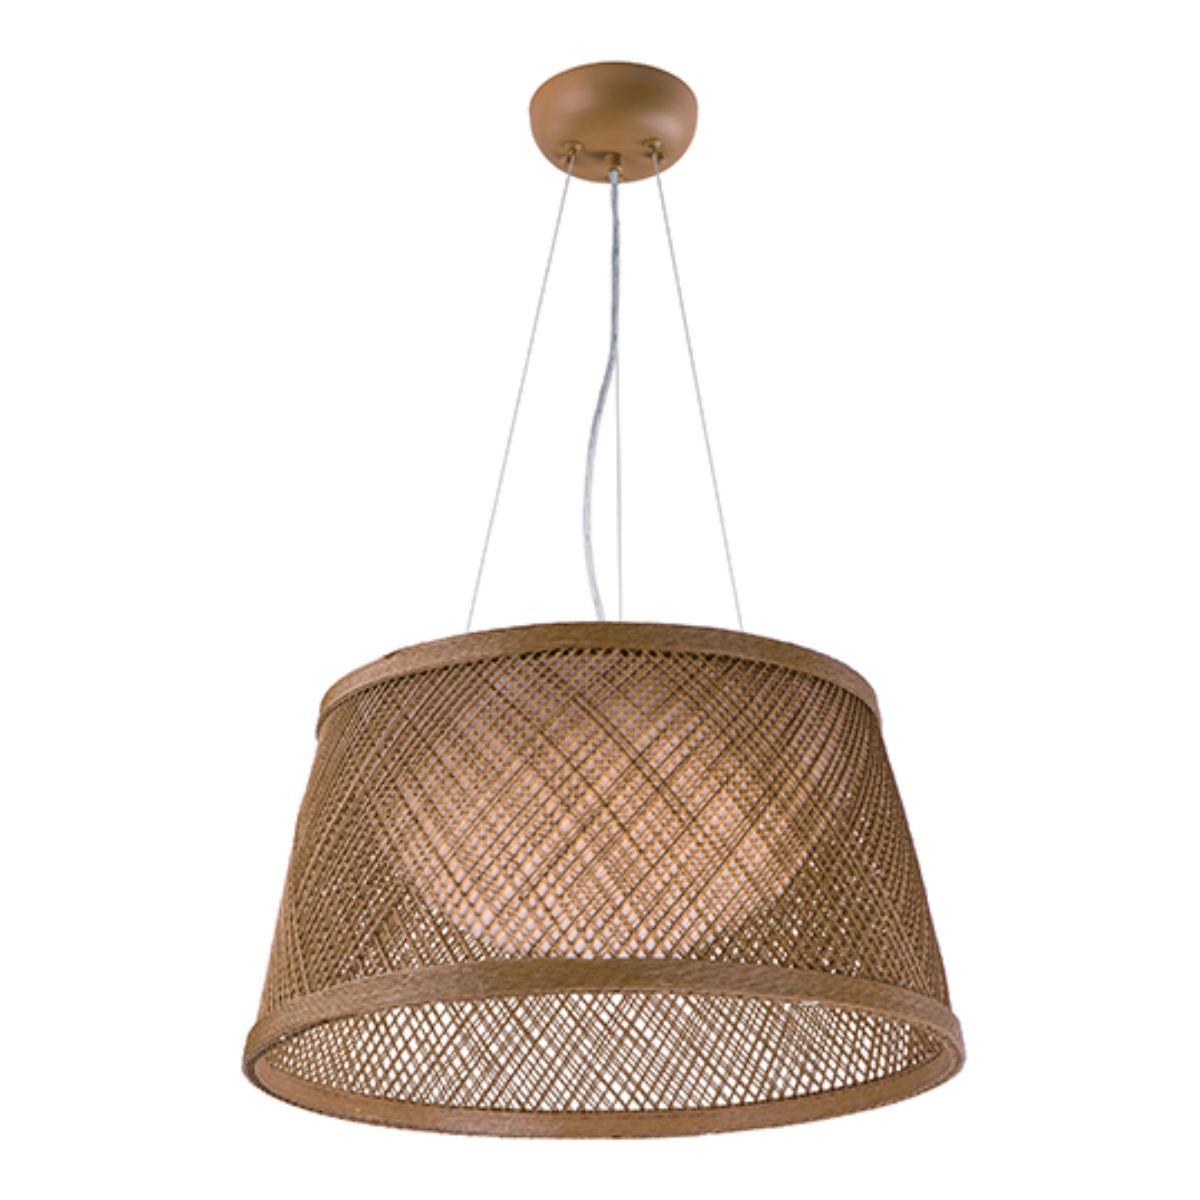 Bahama 20 in. LED Outdoor Pendant Light - Bees Lighting